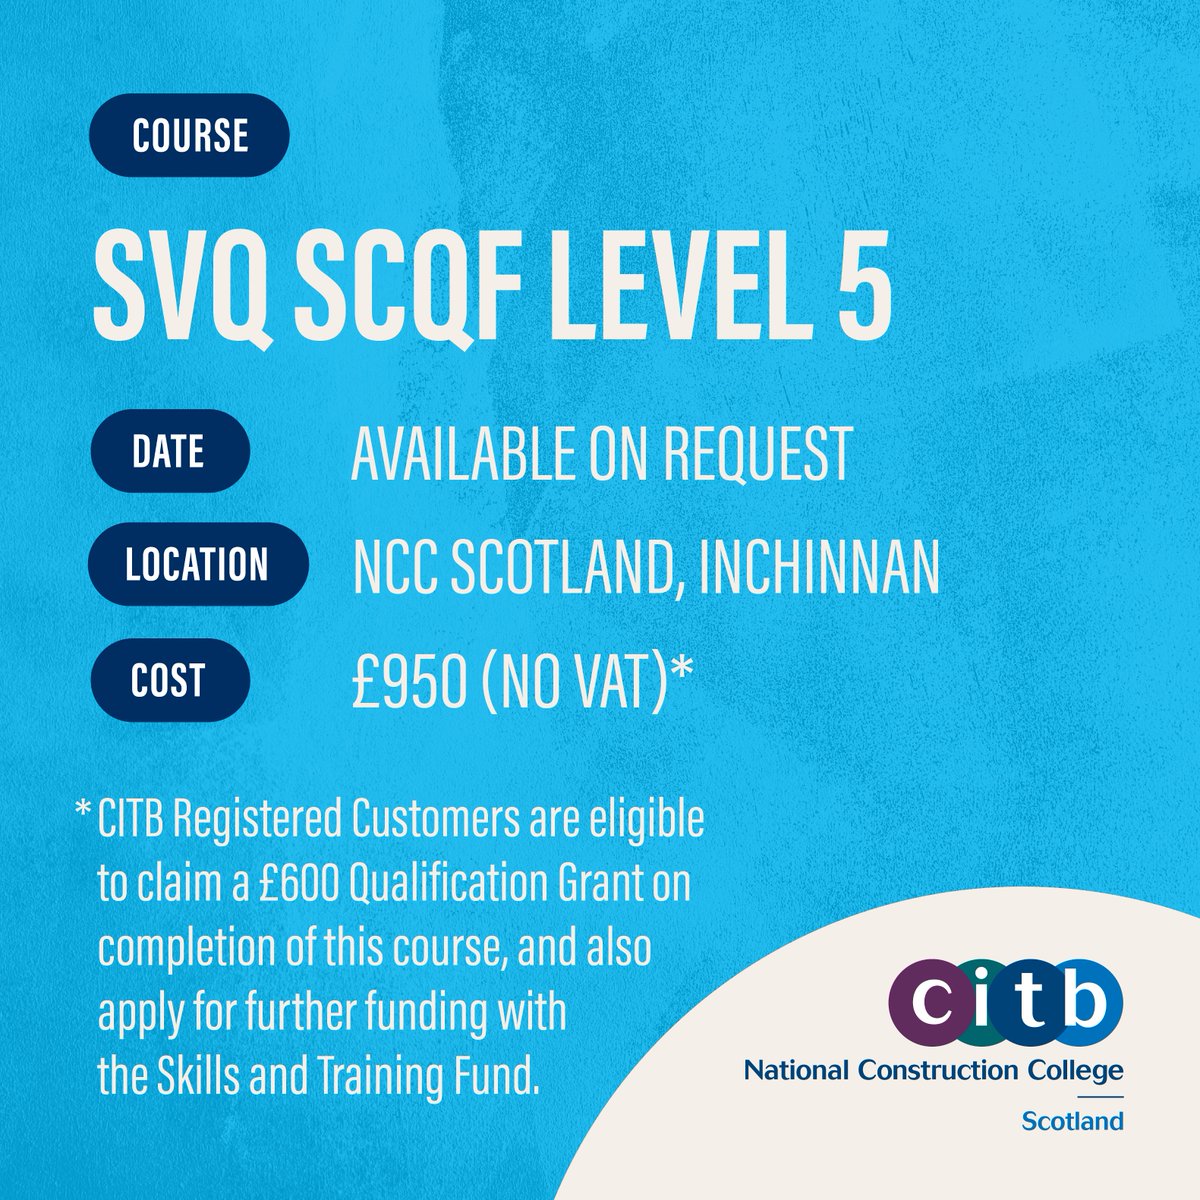 Want to gain a trade qualification? If you have considerable experience, NCC Scotland can offer you the opportunity to gain this via on-site assessment training. Plus, you could be eligible for CITB Grant & Funding. More info below and here: bit.ly/3T3RaSy #NCC